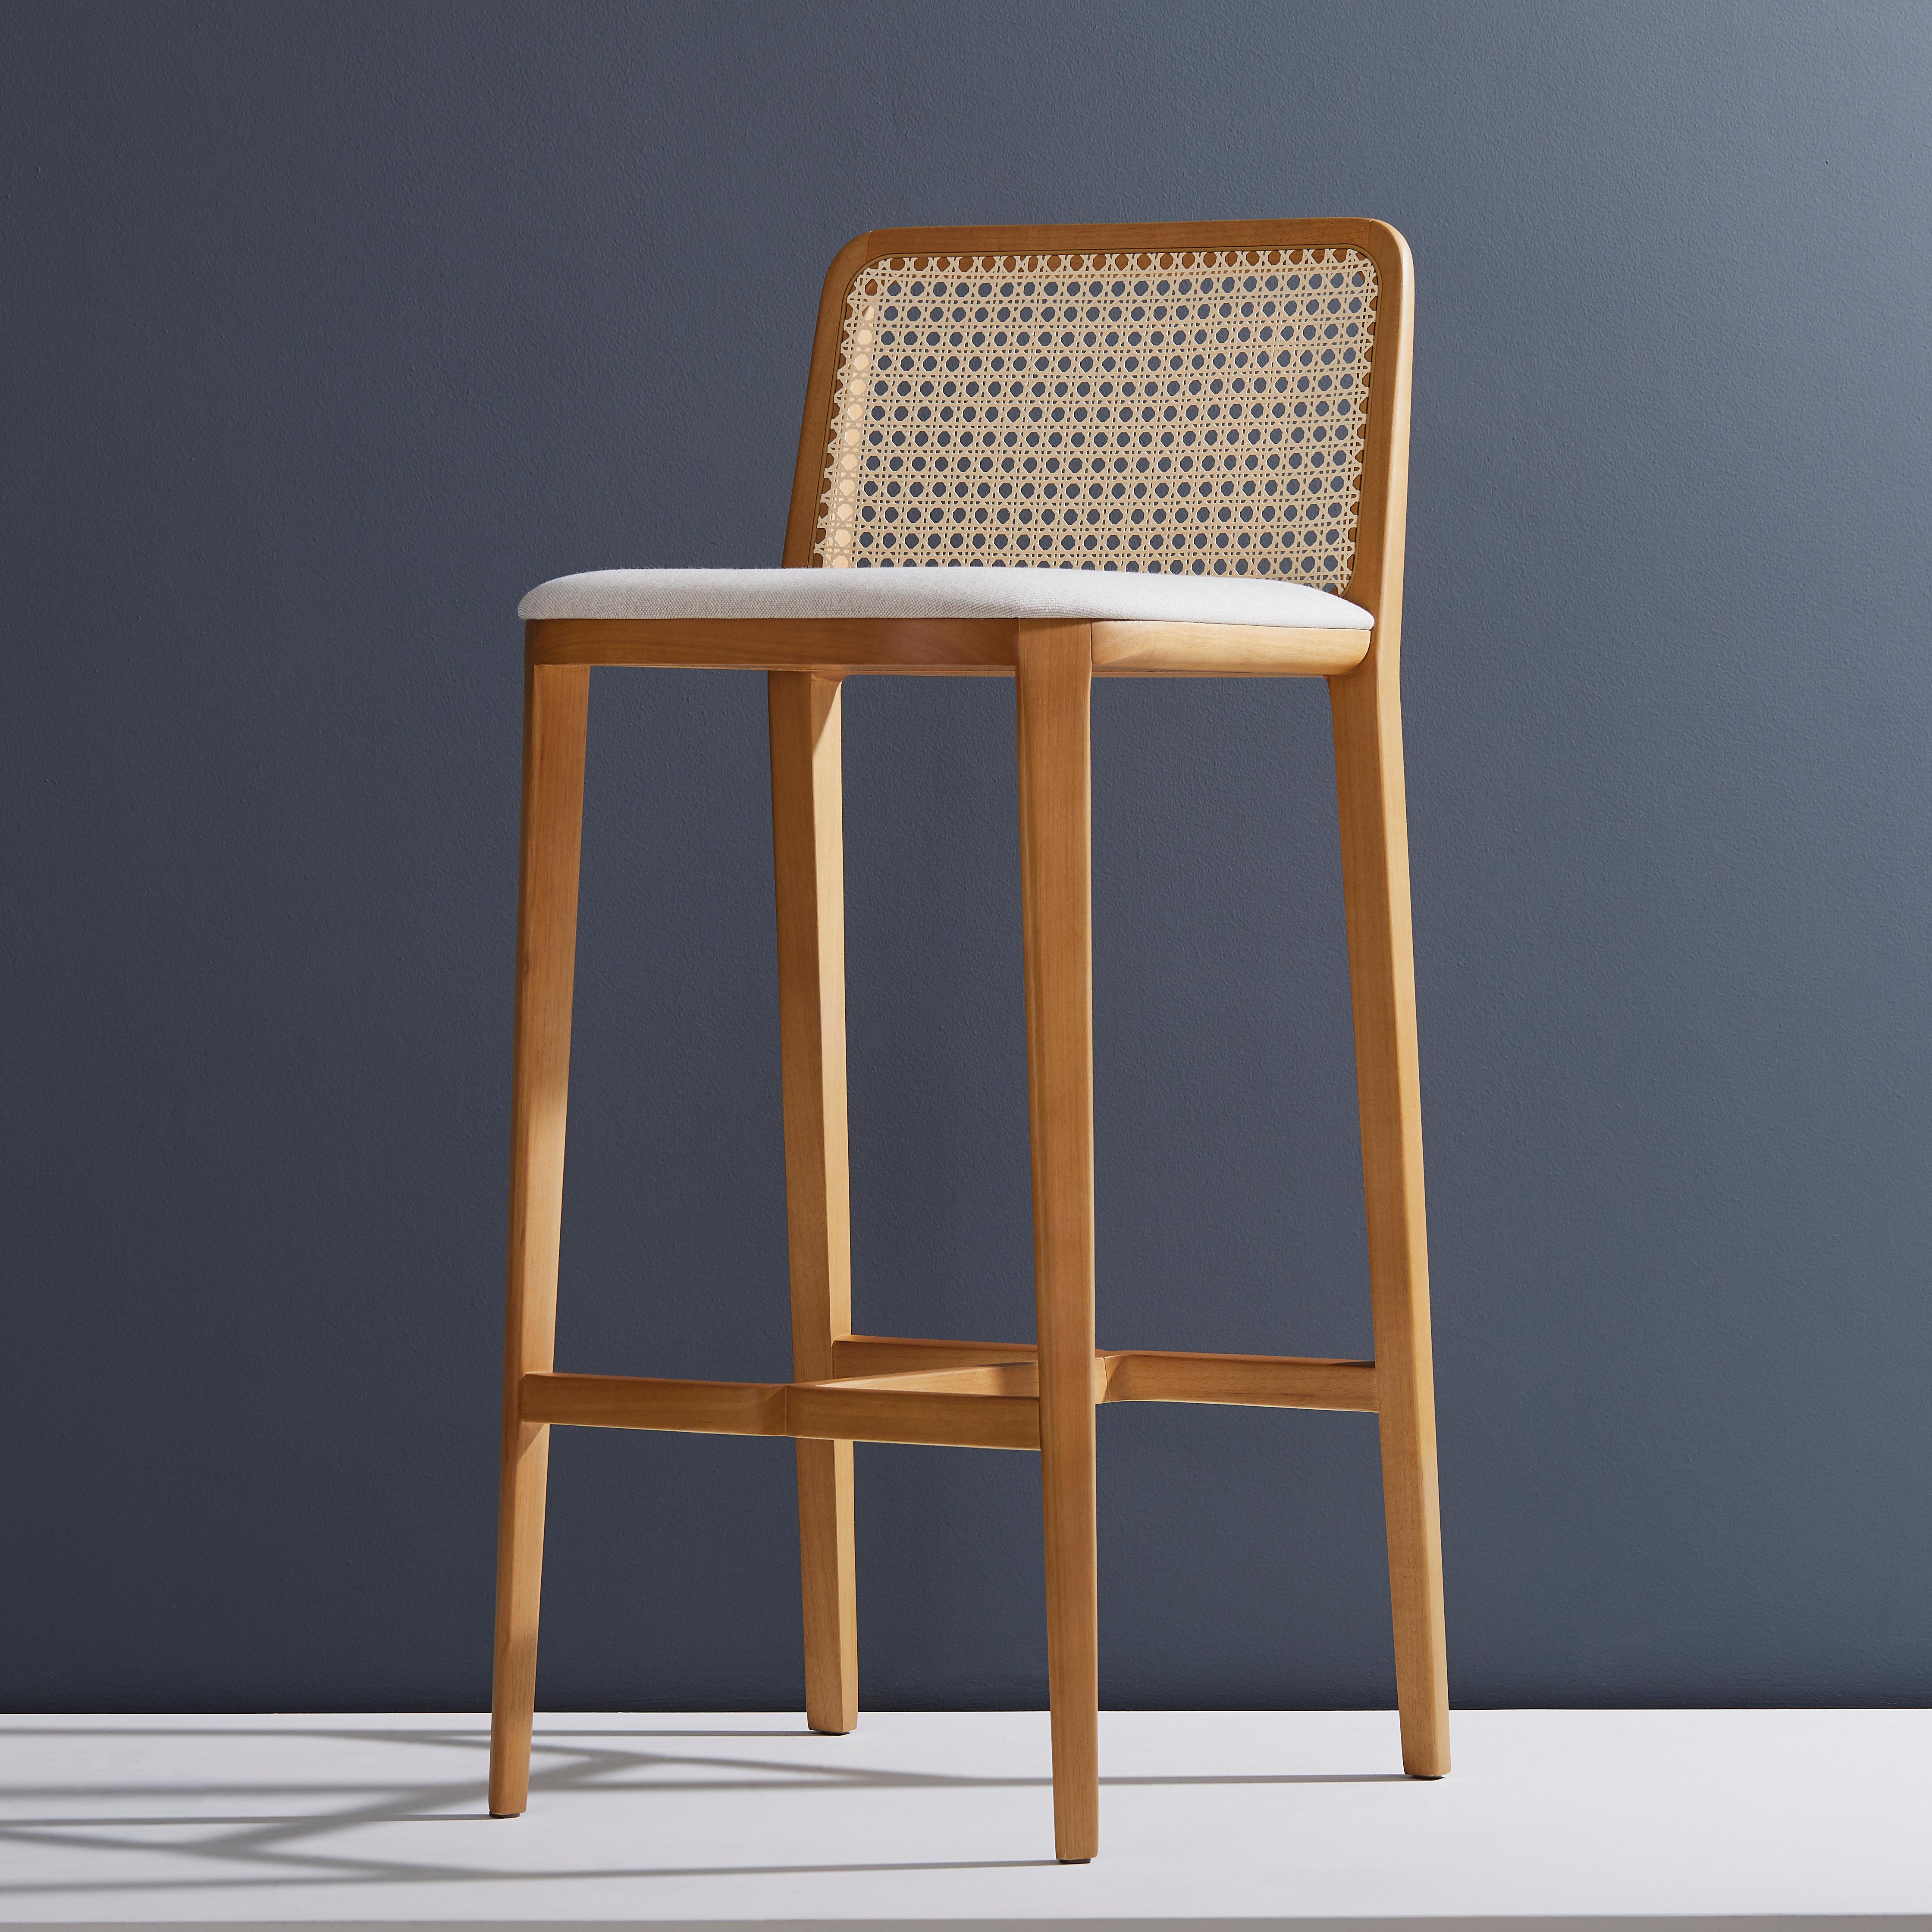 Minimal Style, Solid Wood Stool, Textiles or Leather Seatings, Caning Backboard In New Condition For Sale In Vila Cordeiro, São Paulo